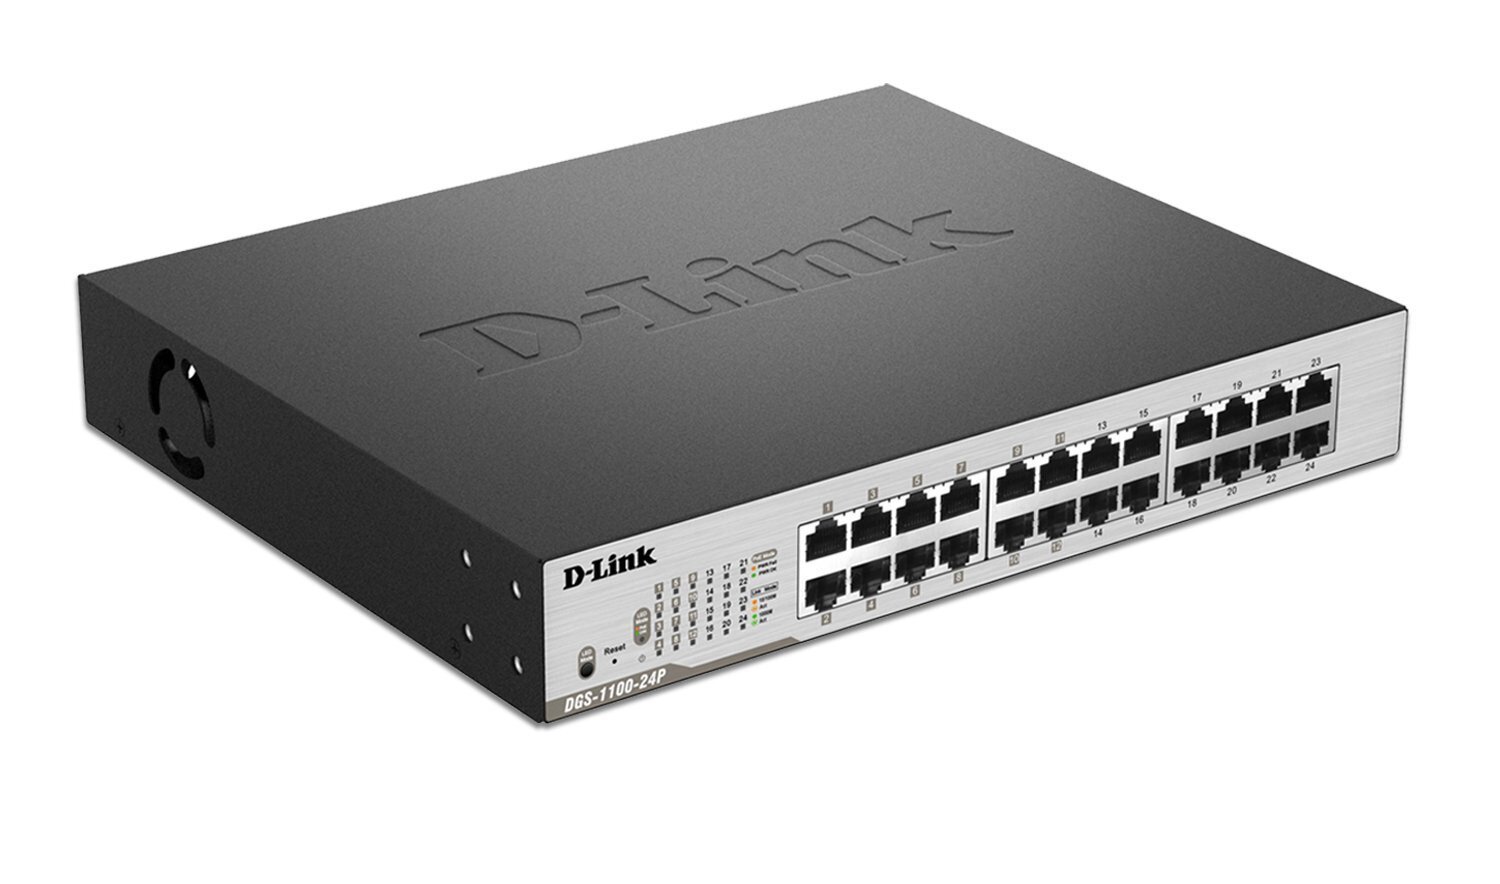 What You Need To Know About 24 Port PoE Switches For Your Networks